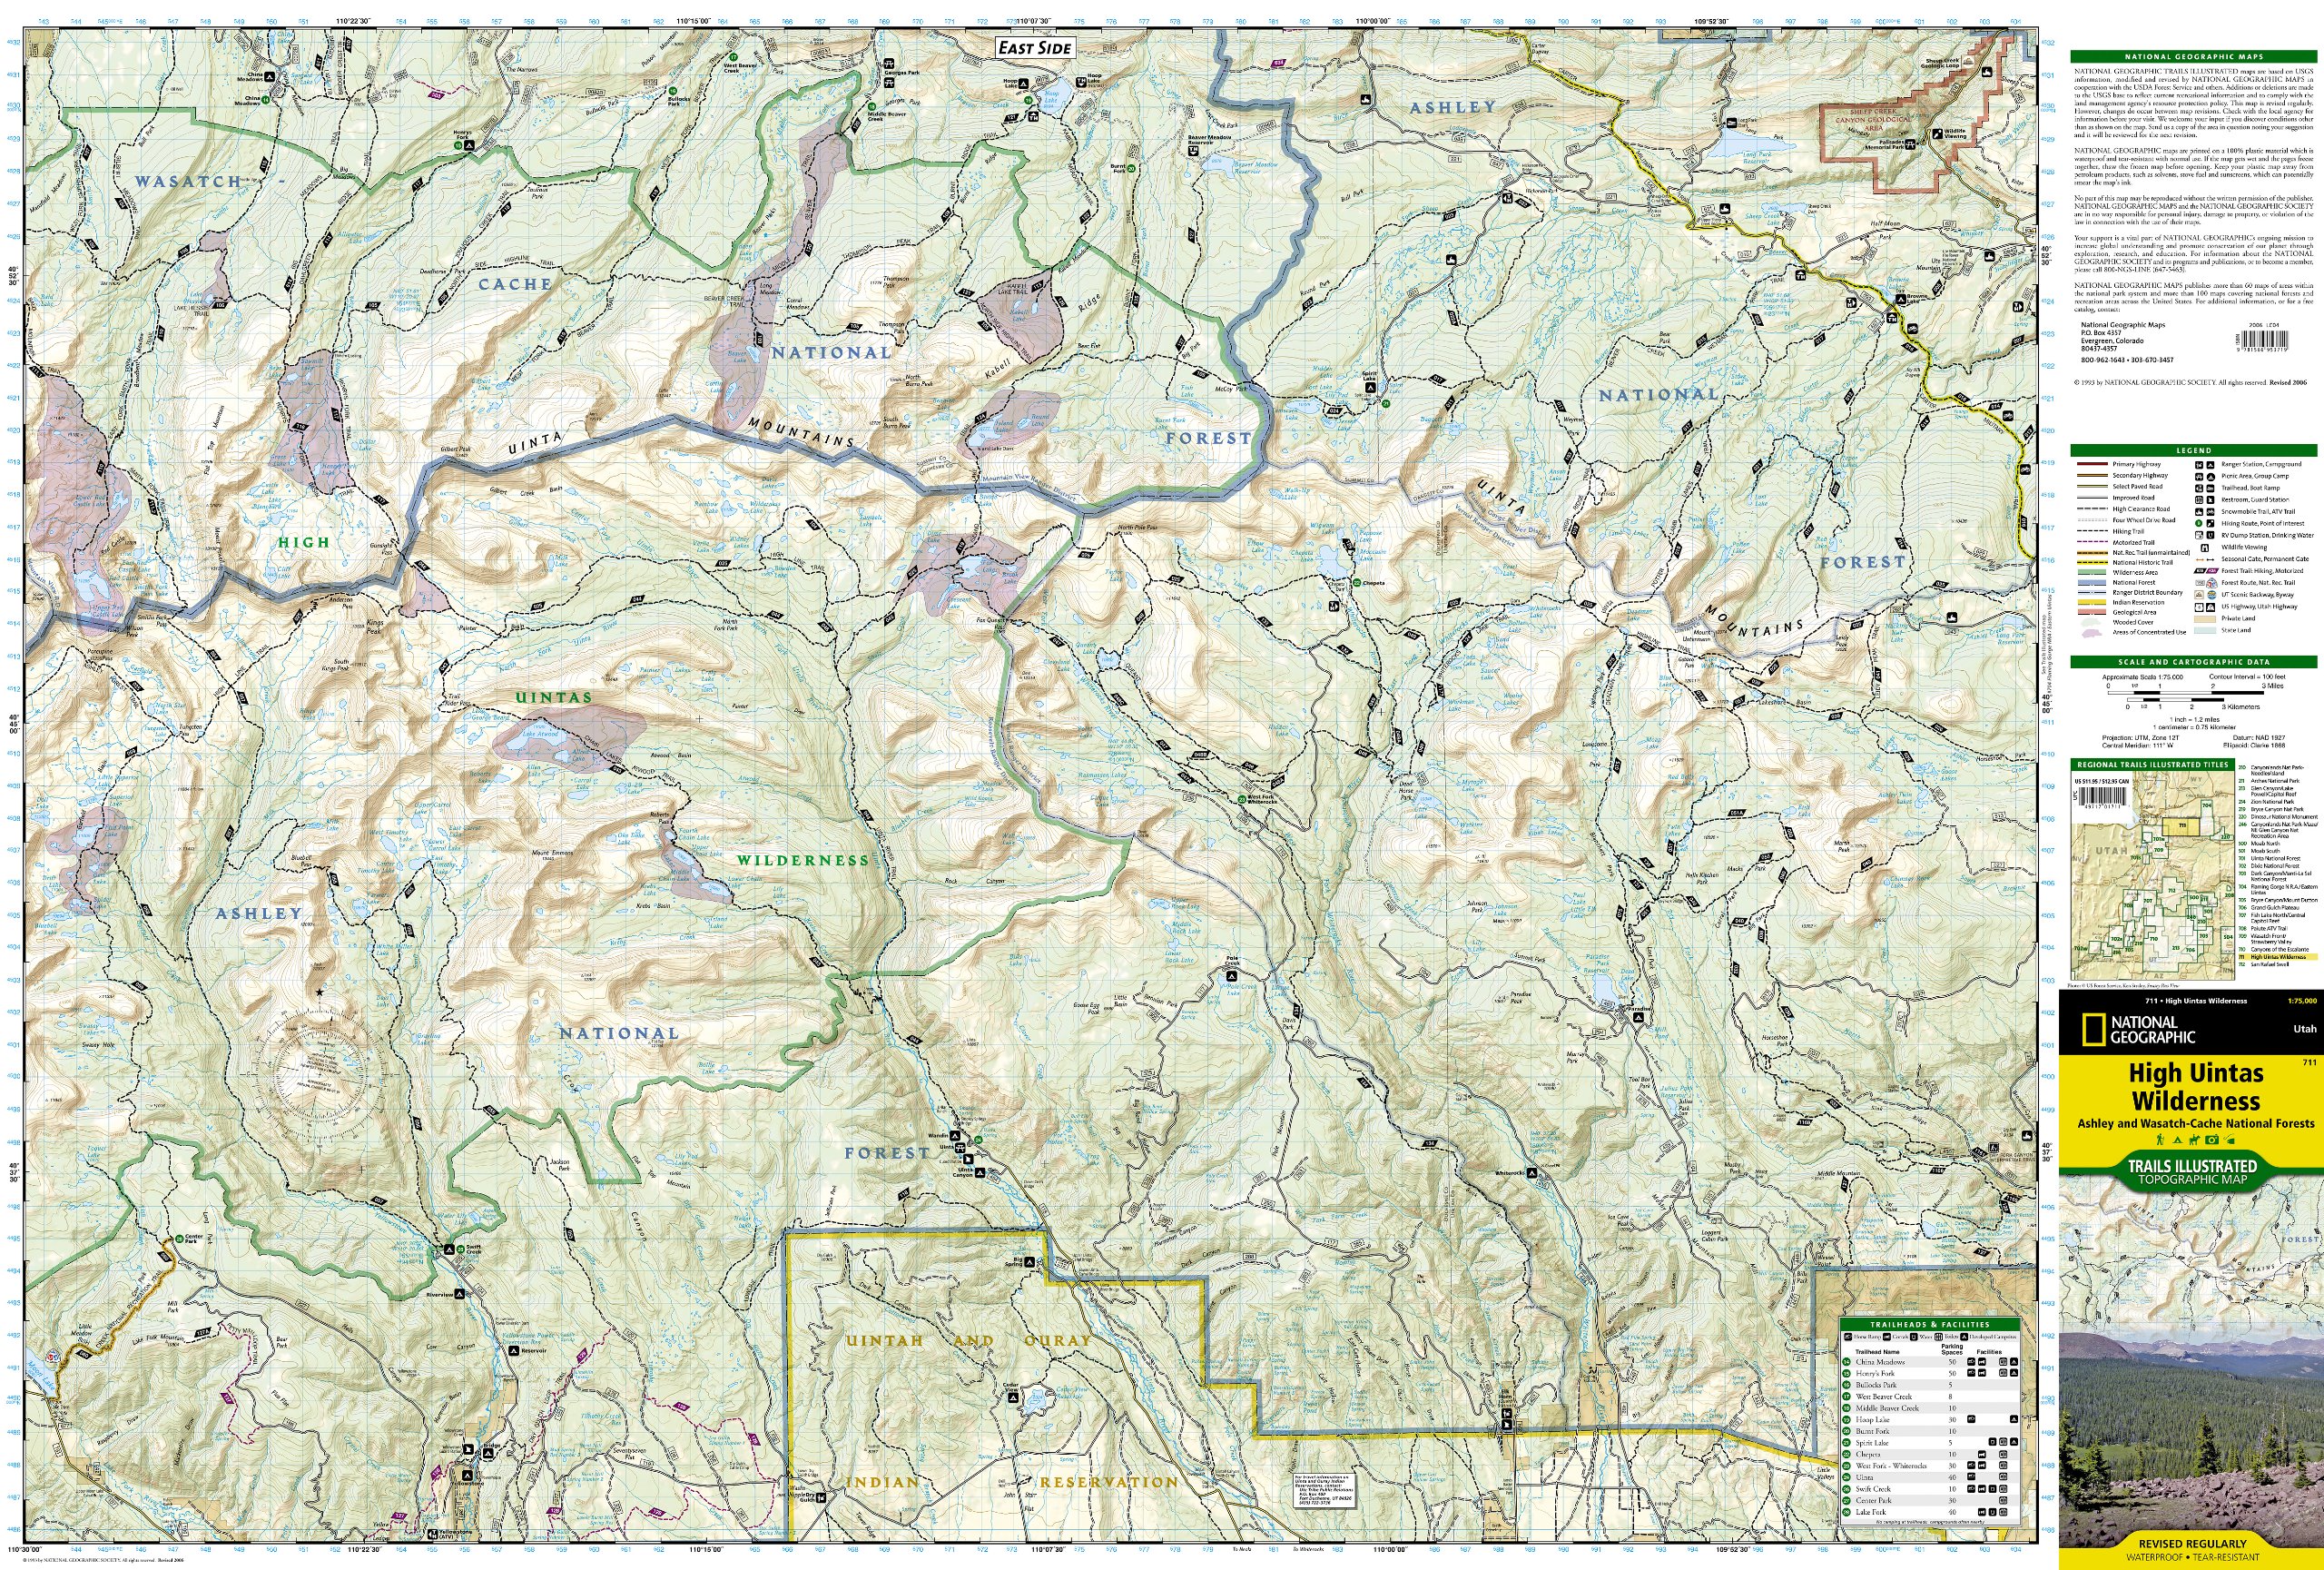 High Uintas Wilderness Map - Rocky Mountain Maps & Guidebooks